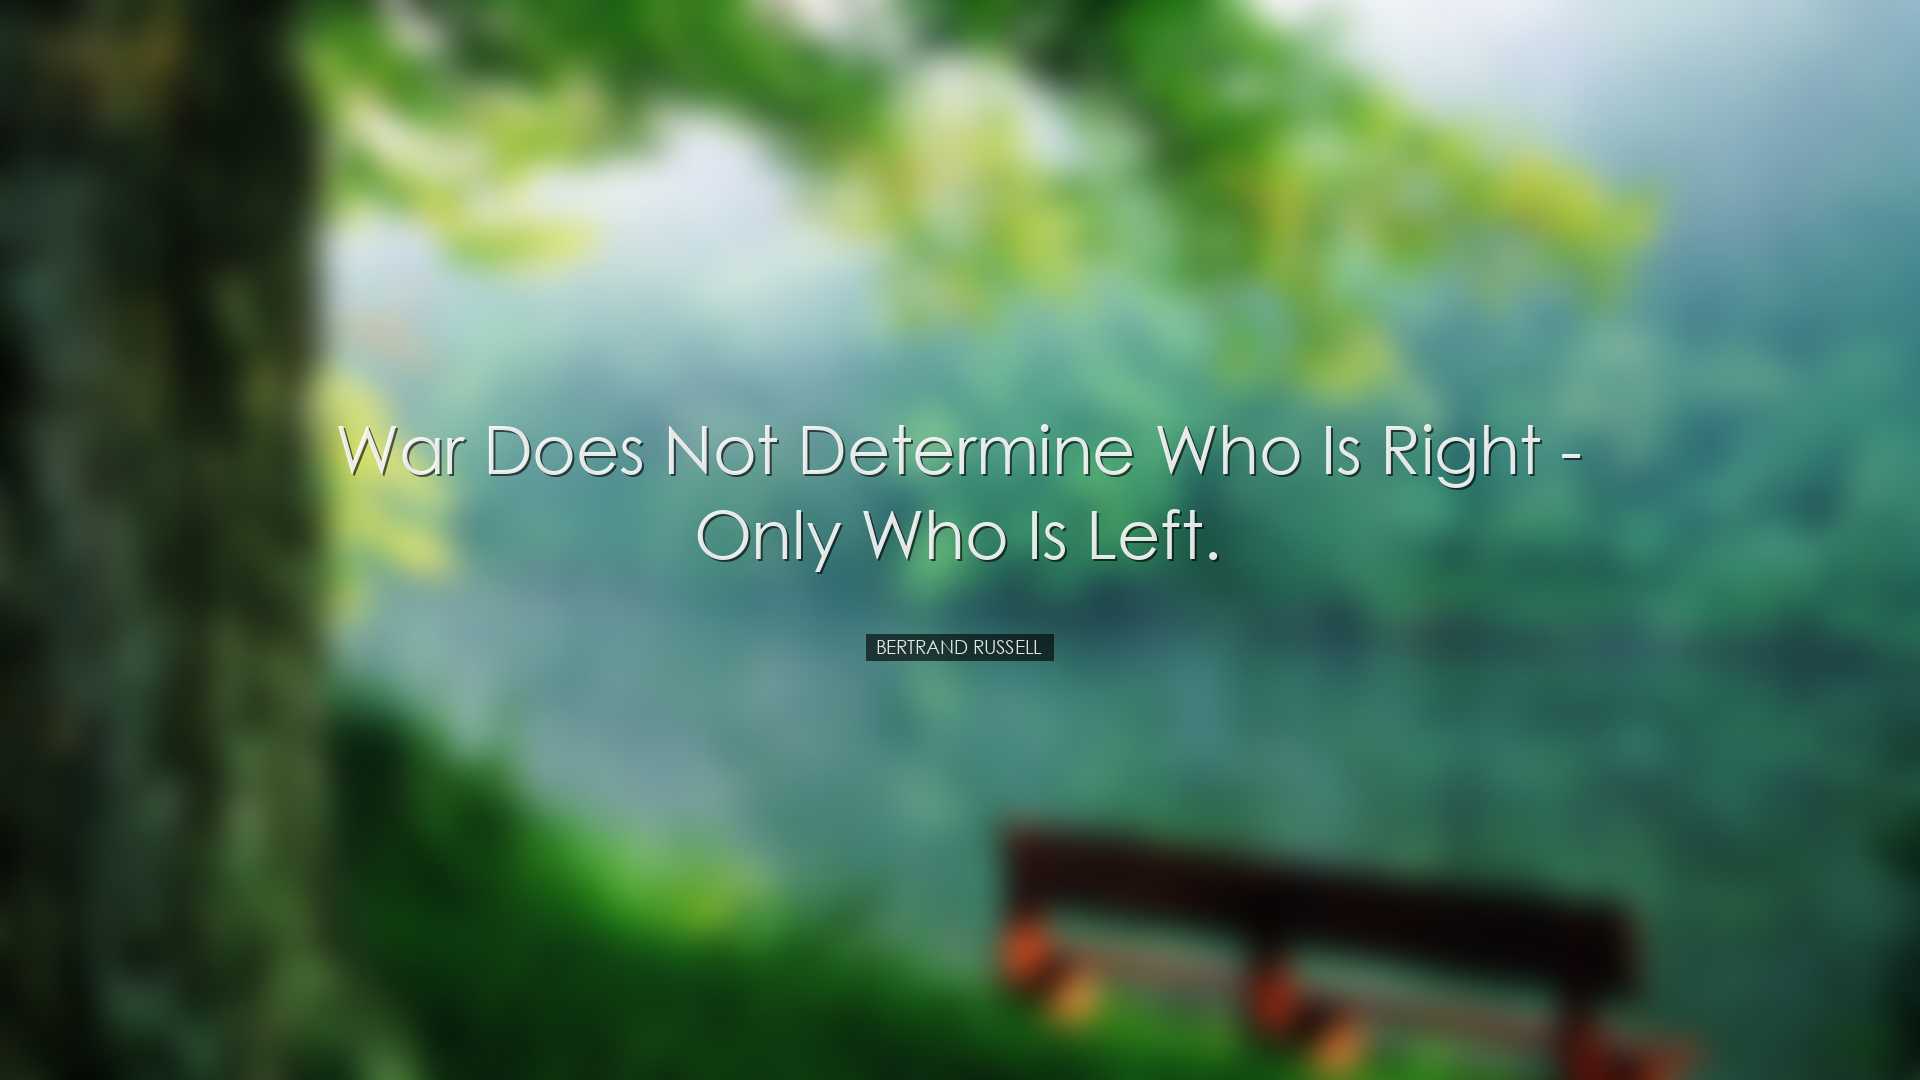 War does not determine who is right - only who is left. - Bertrand